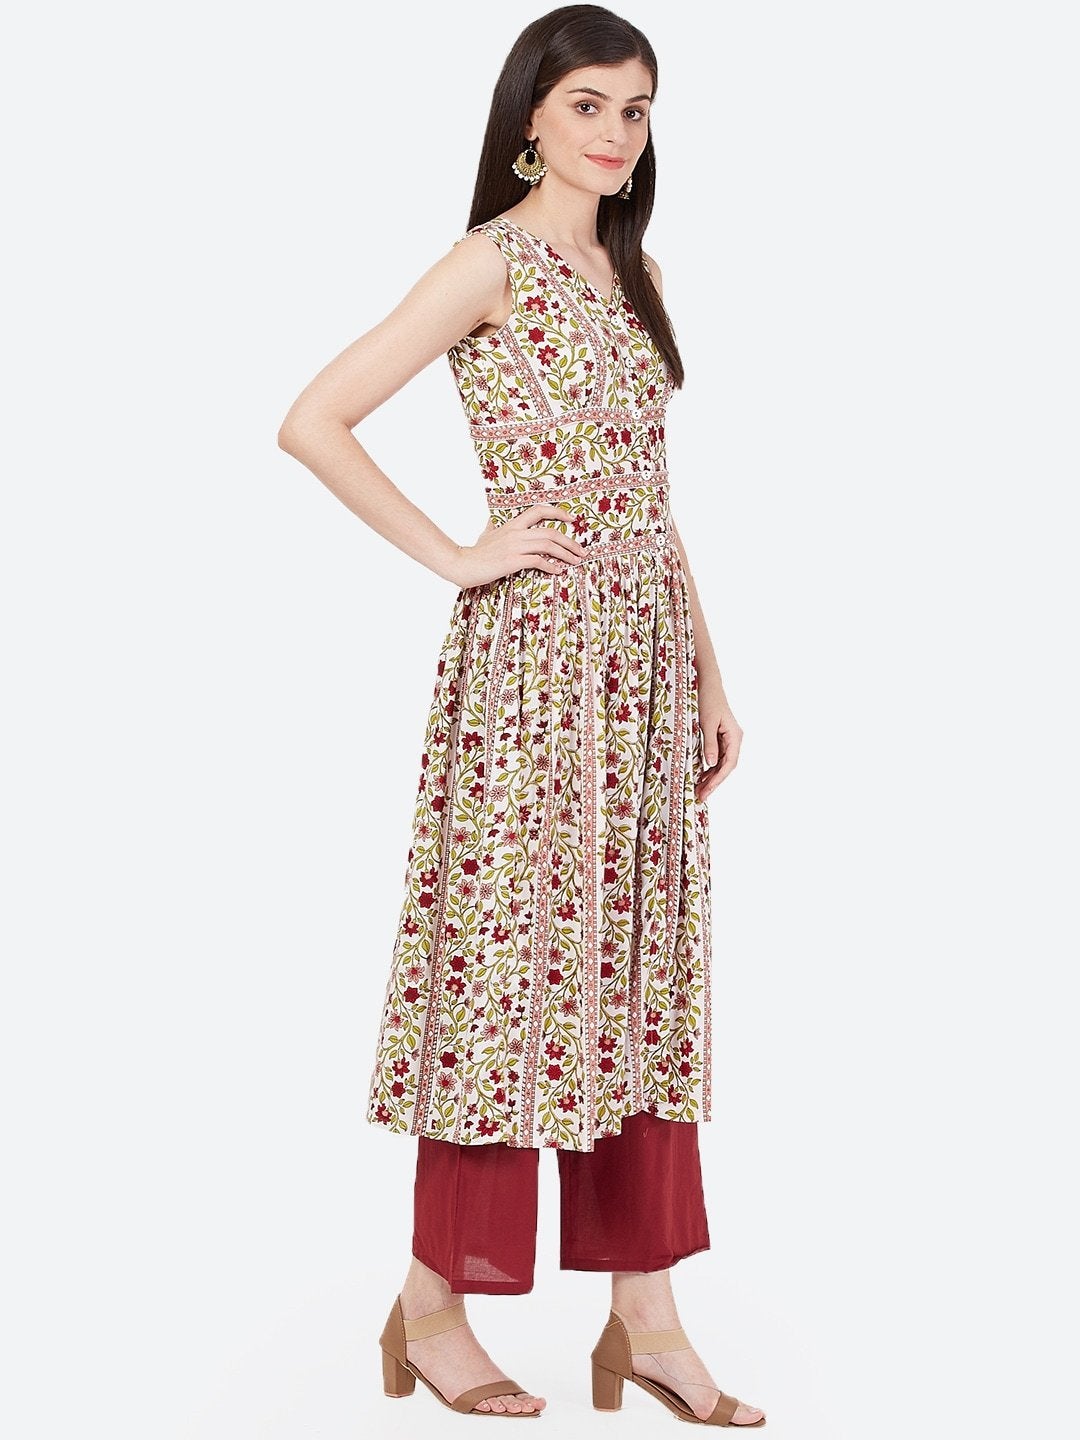 Women's Off-White & Red Printed A-Line Kurta with Gathers - Meeranshi